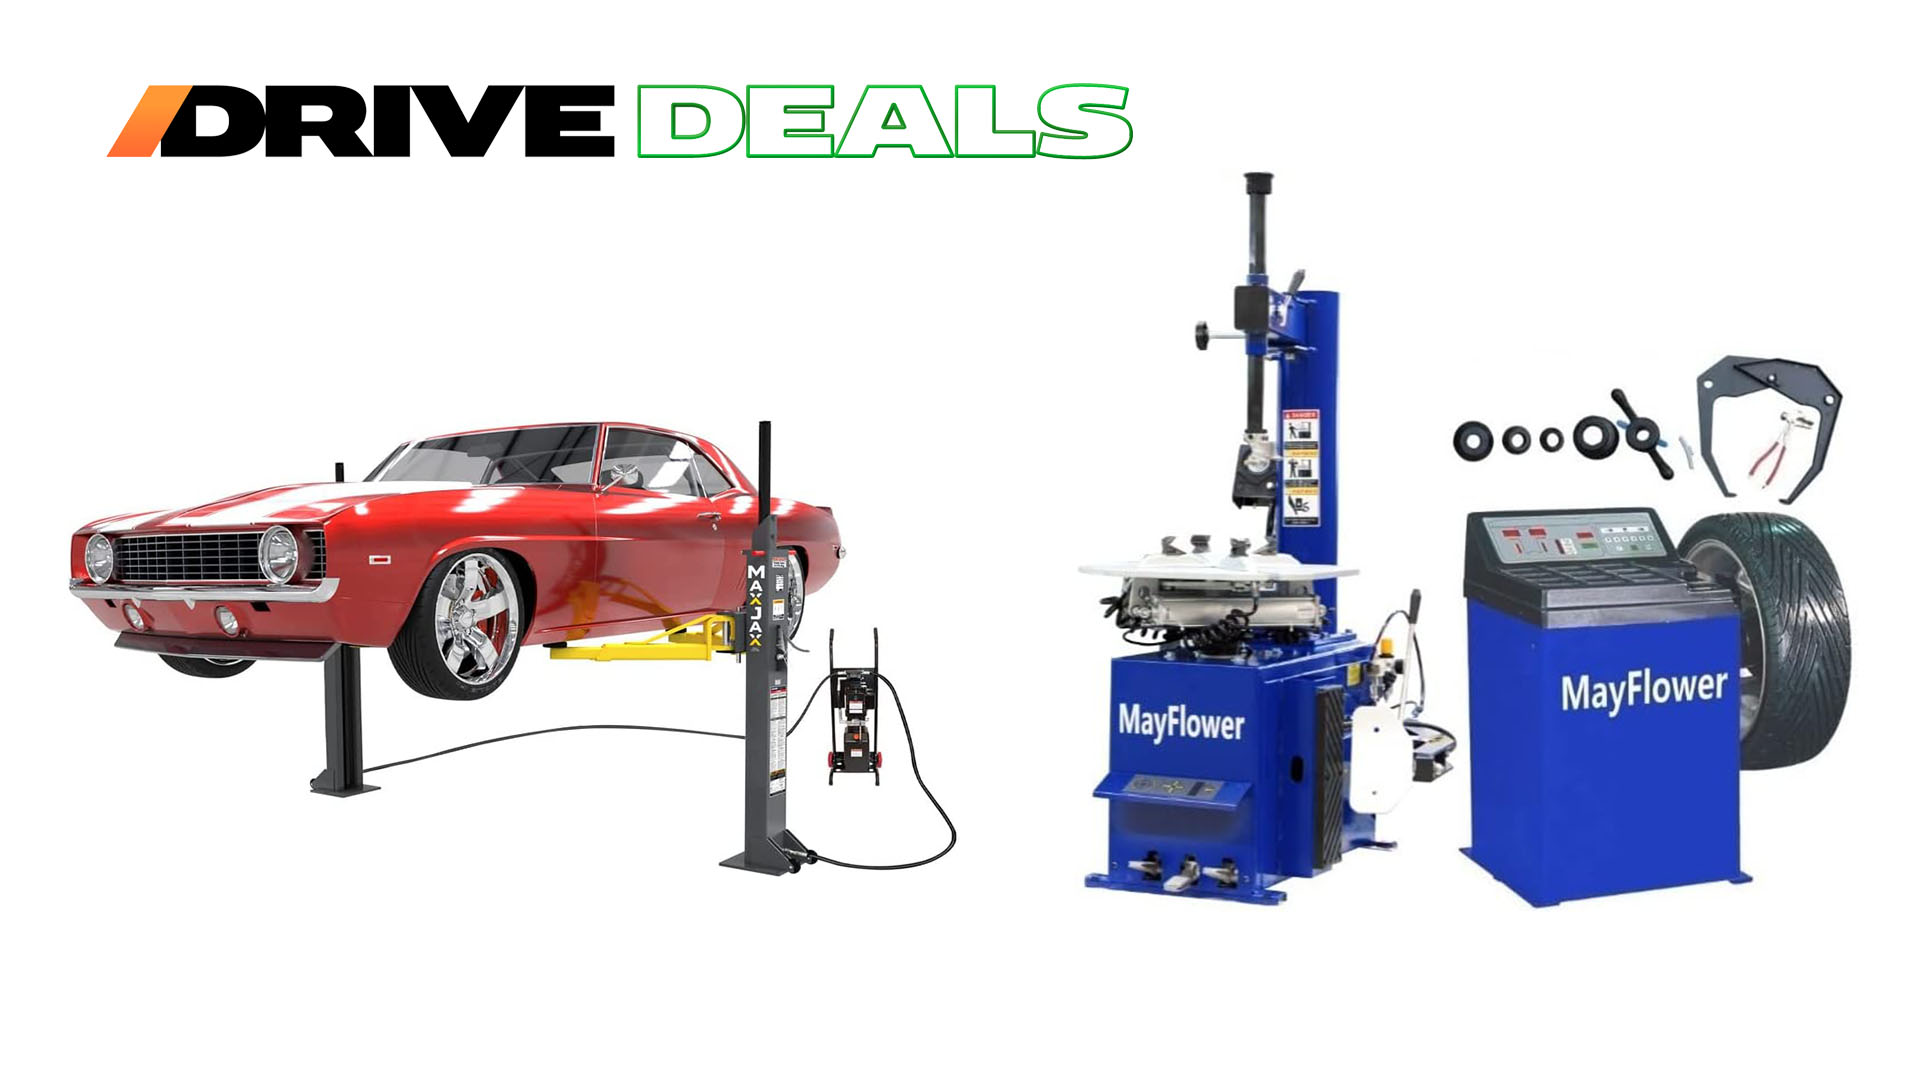 Save Big on Detailing Gear This Prime Day